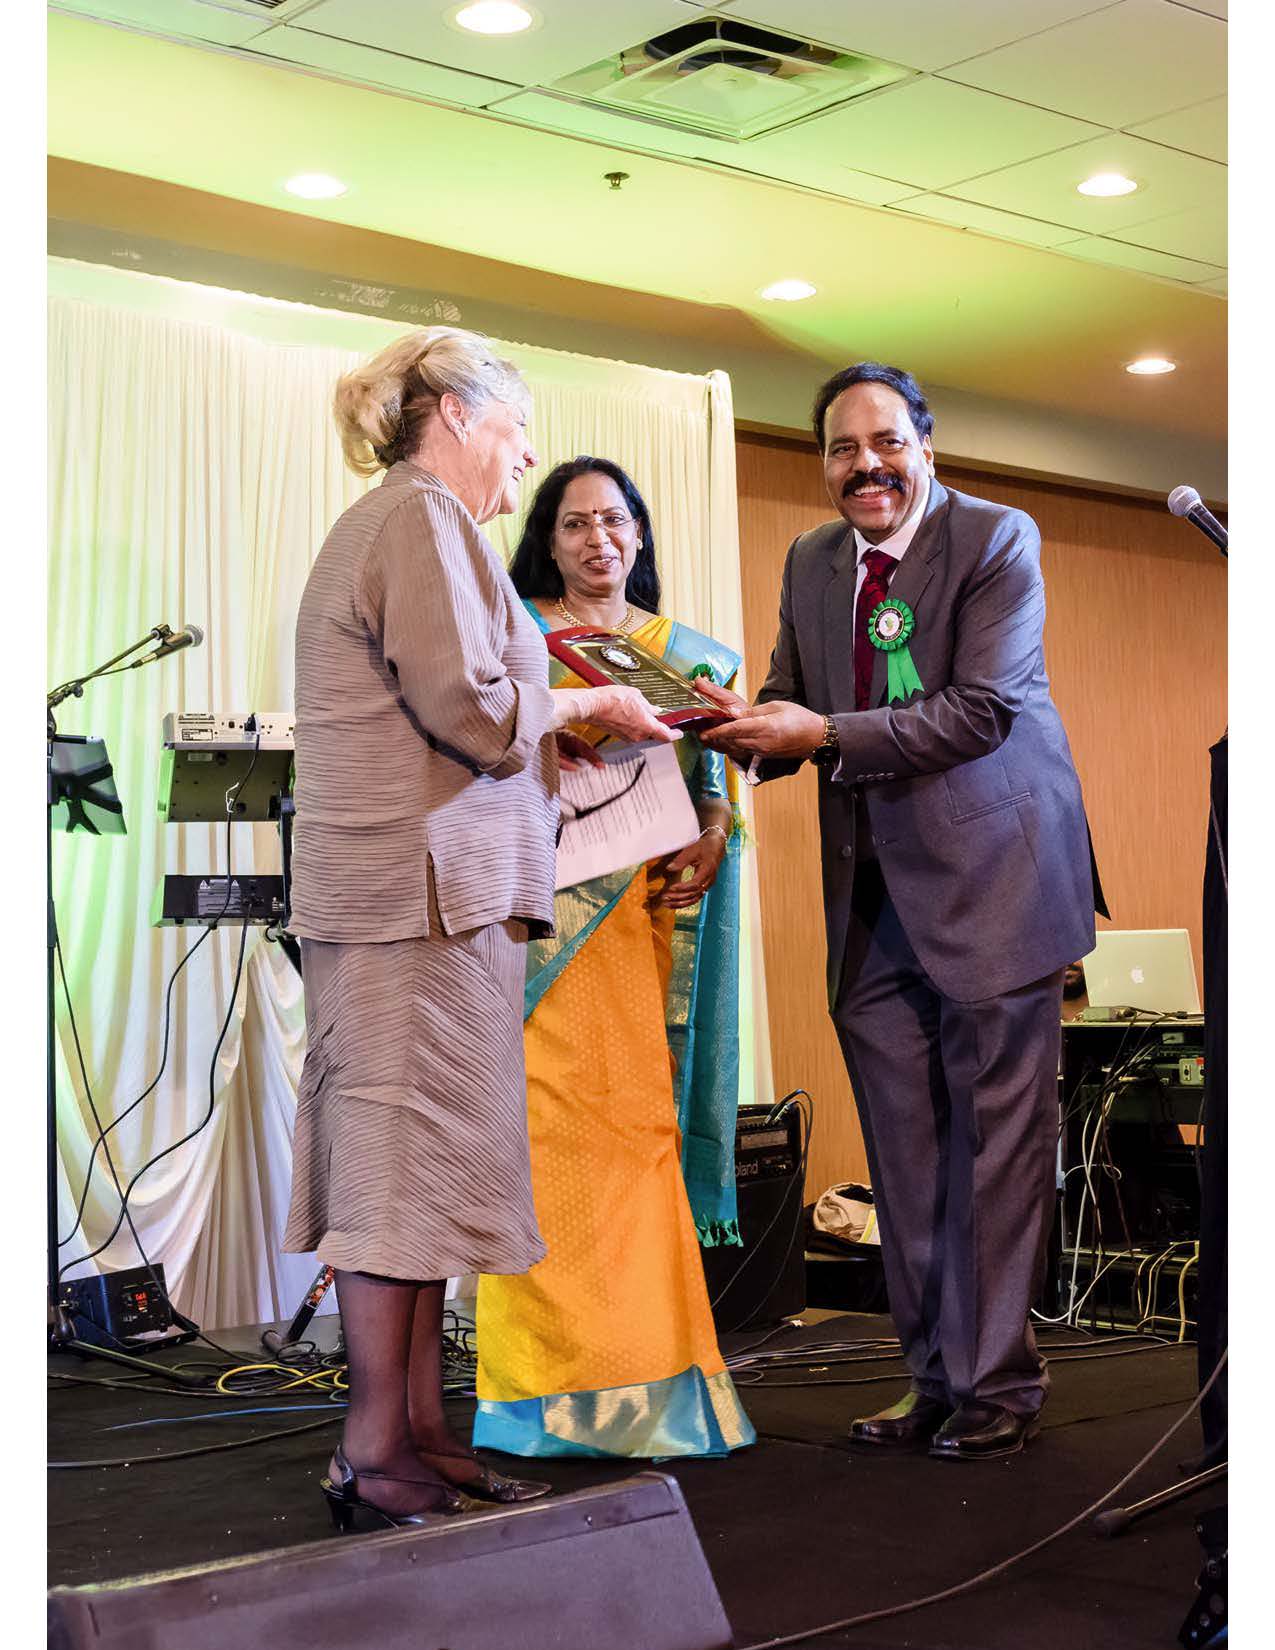 Santhigram Founders honoring Ms. Melinna Giannini, President of Insurance Consulting company, with an award for her excellent services provided to Santhigram